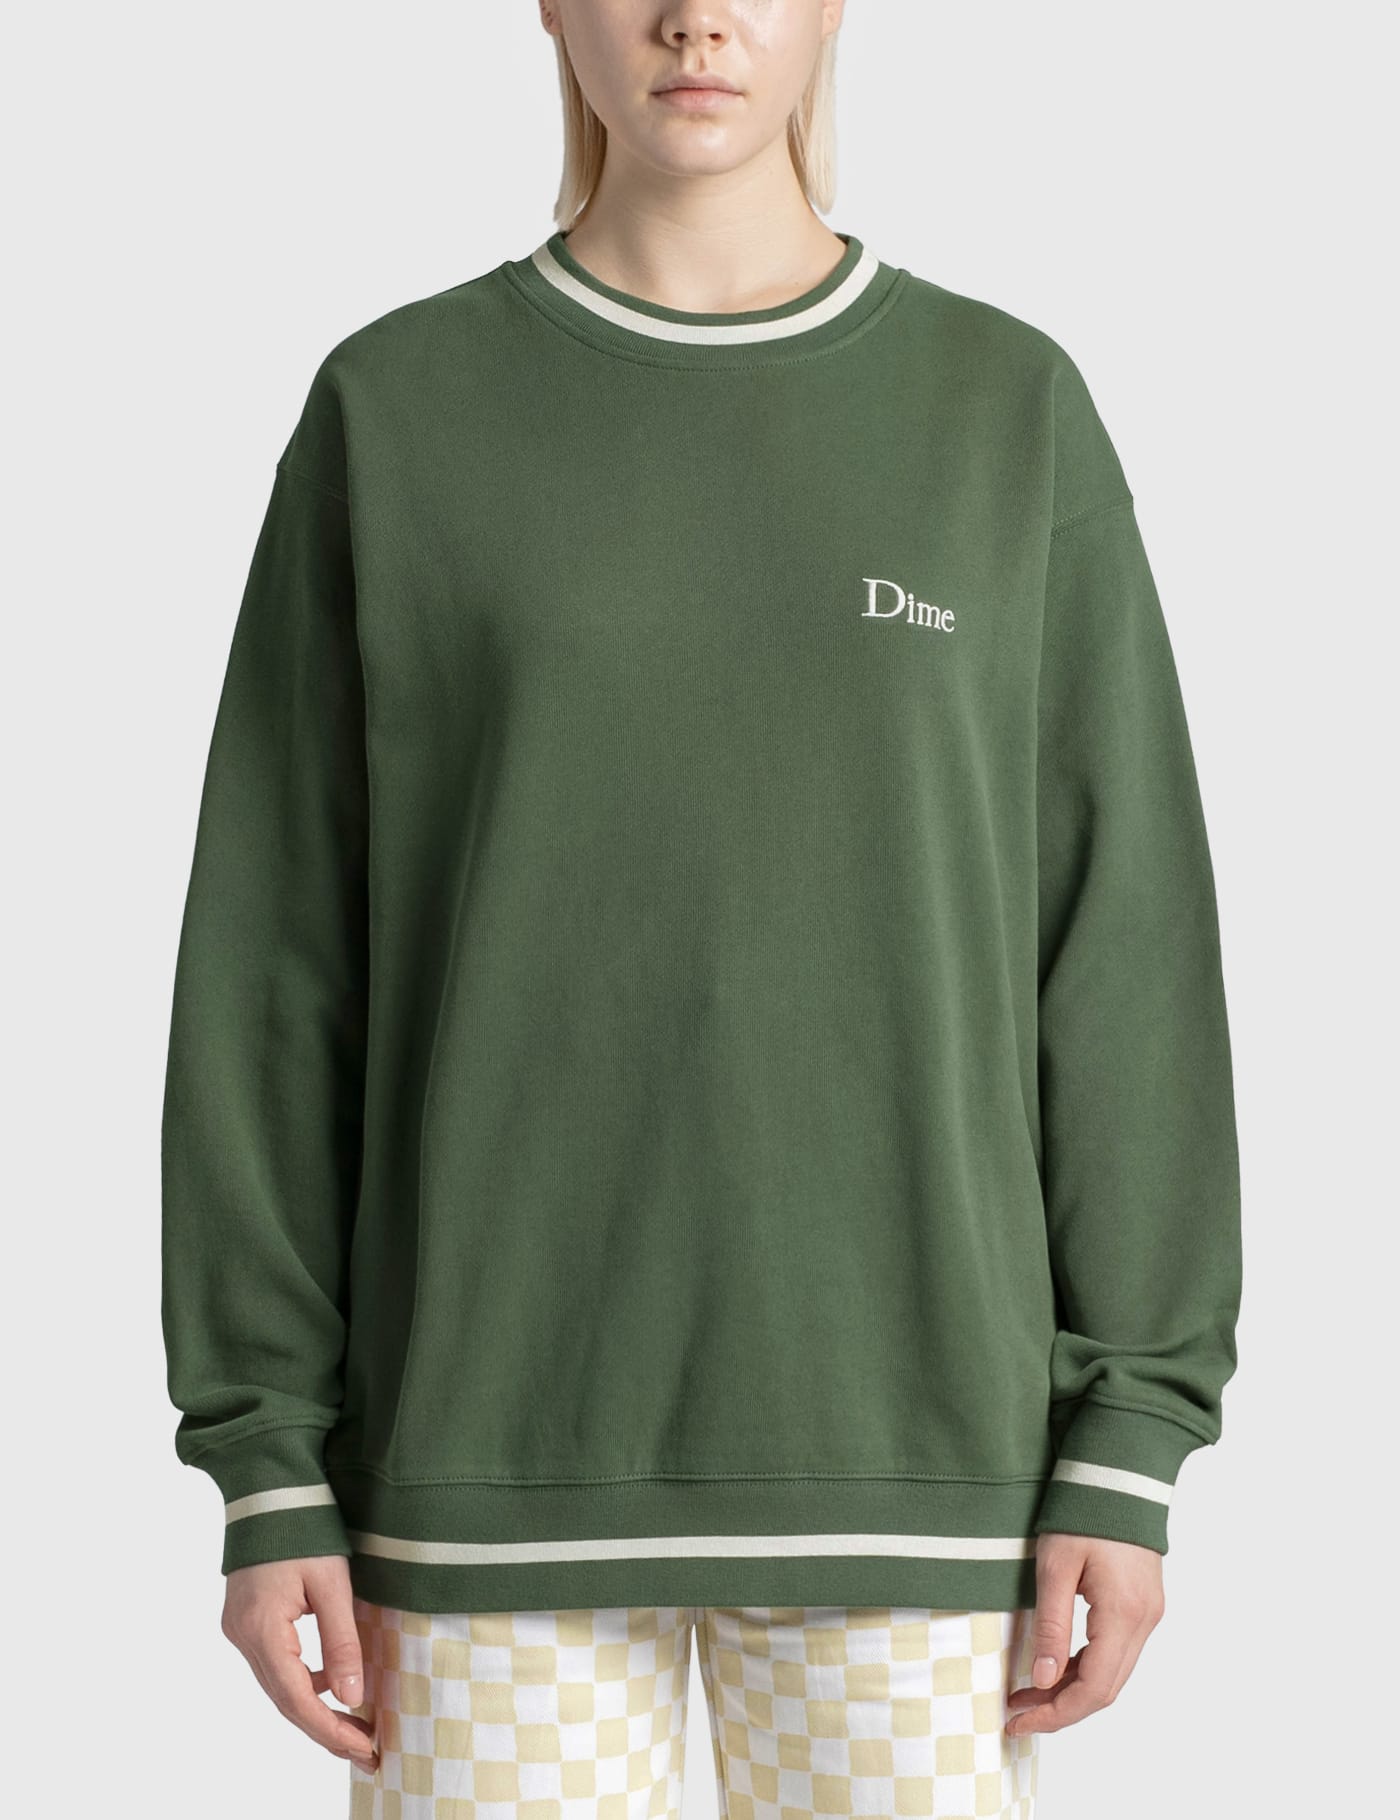 Dime - Classic French Terry Crewneck | HBX - Globally Curated Fashion and  Lifestyle by Hypebeast